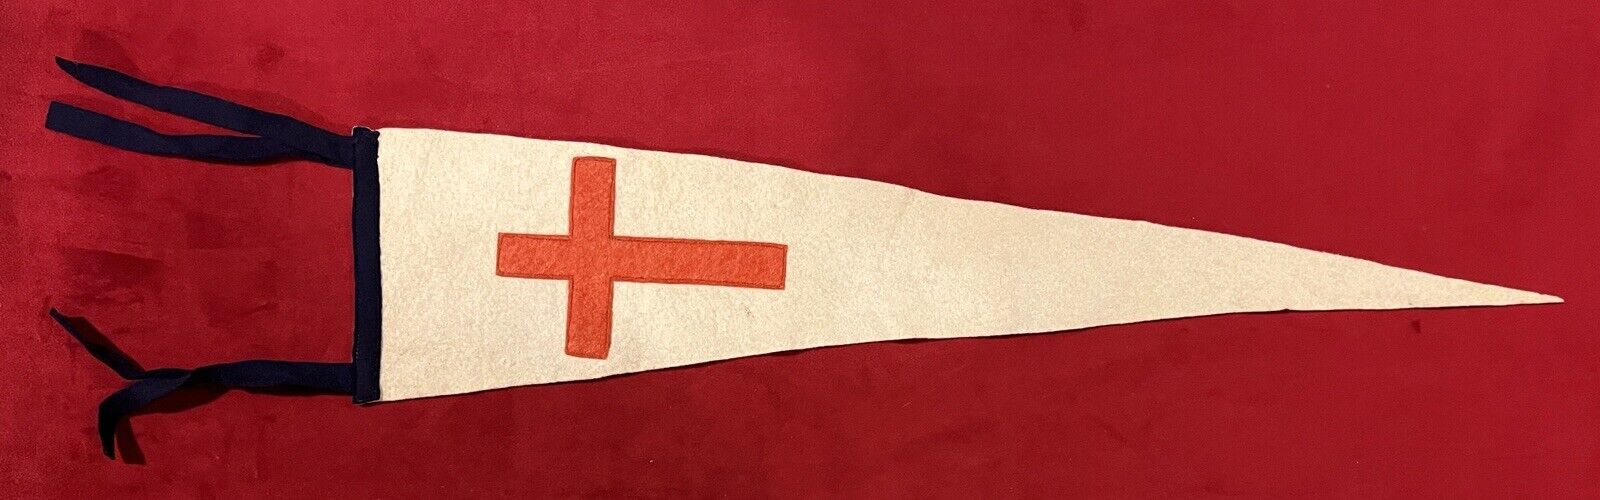 Vintage Crusade Style Pennant 23 Inch Red Cross Catholic Christian Old